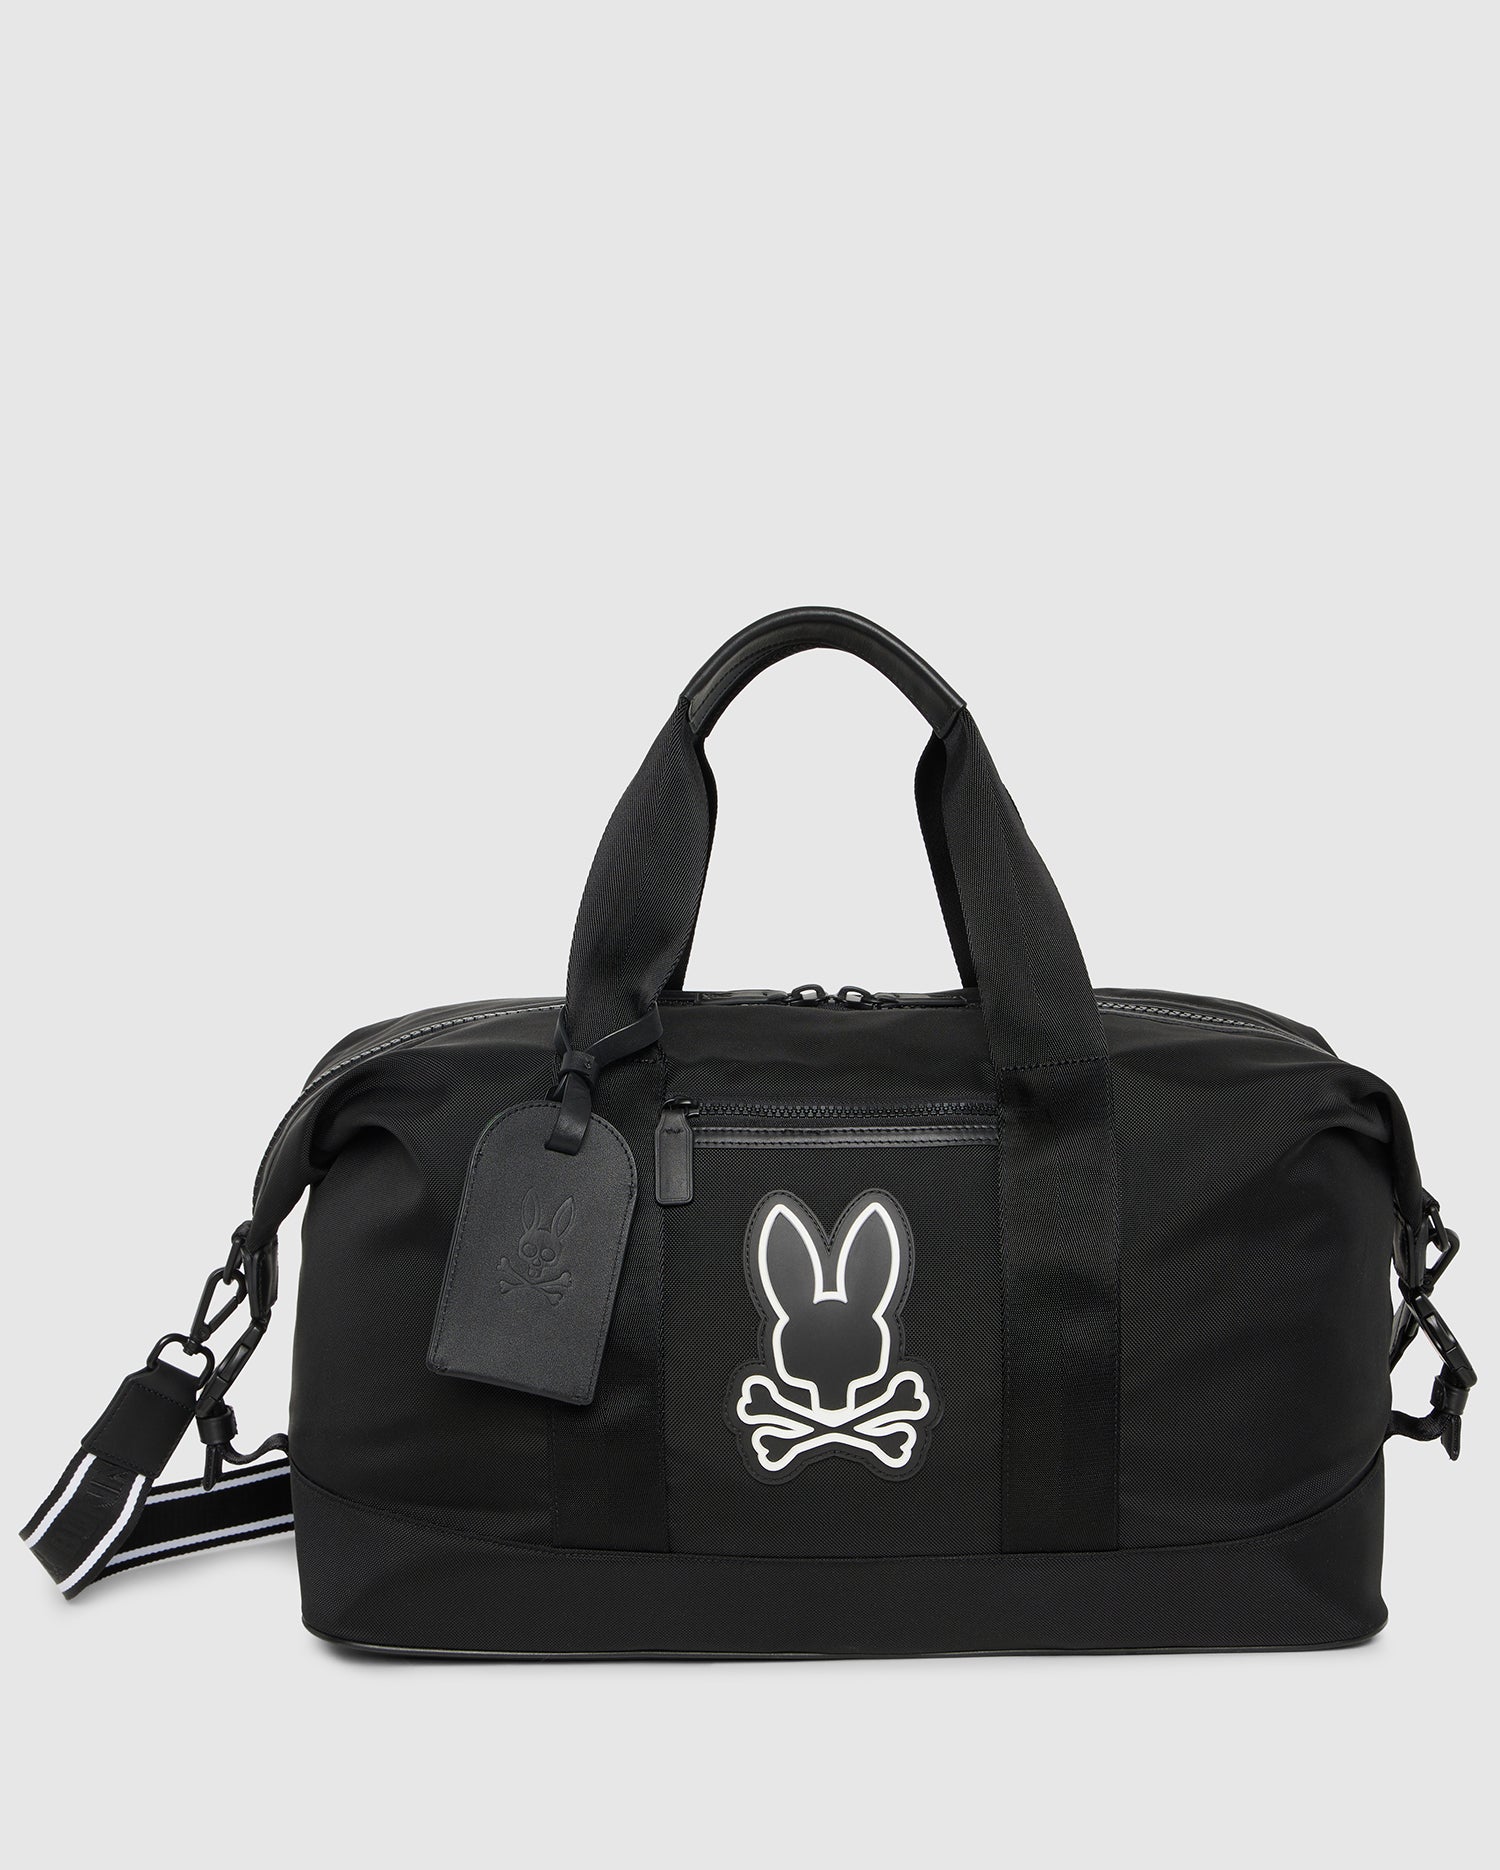 A black MENS WEEKENDER BAG - B6A629Z1BG by Psycho Bunny featuring a white outline of a bunny skull and crossbones design on the front. Perfect as travel luggage, the bag has two handles, a detachable shoulder strap, a zipper closure, and a small attached luggage tag.